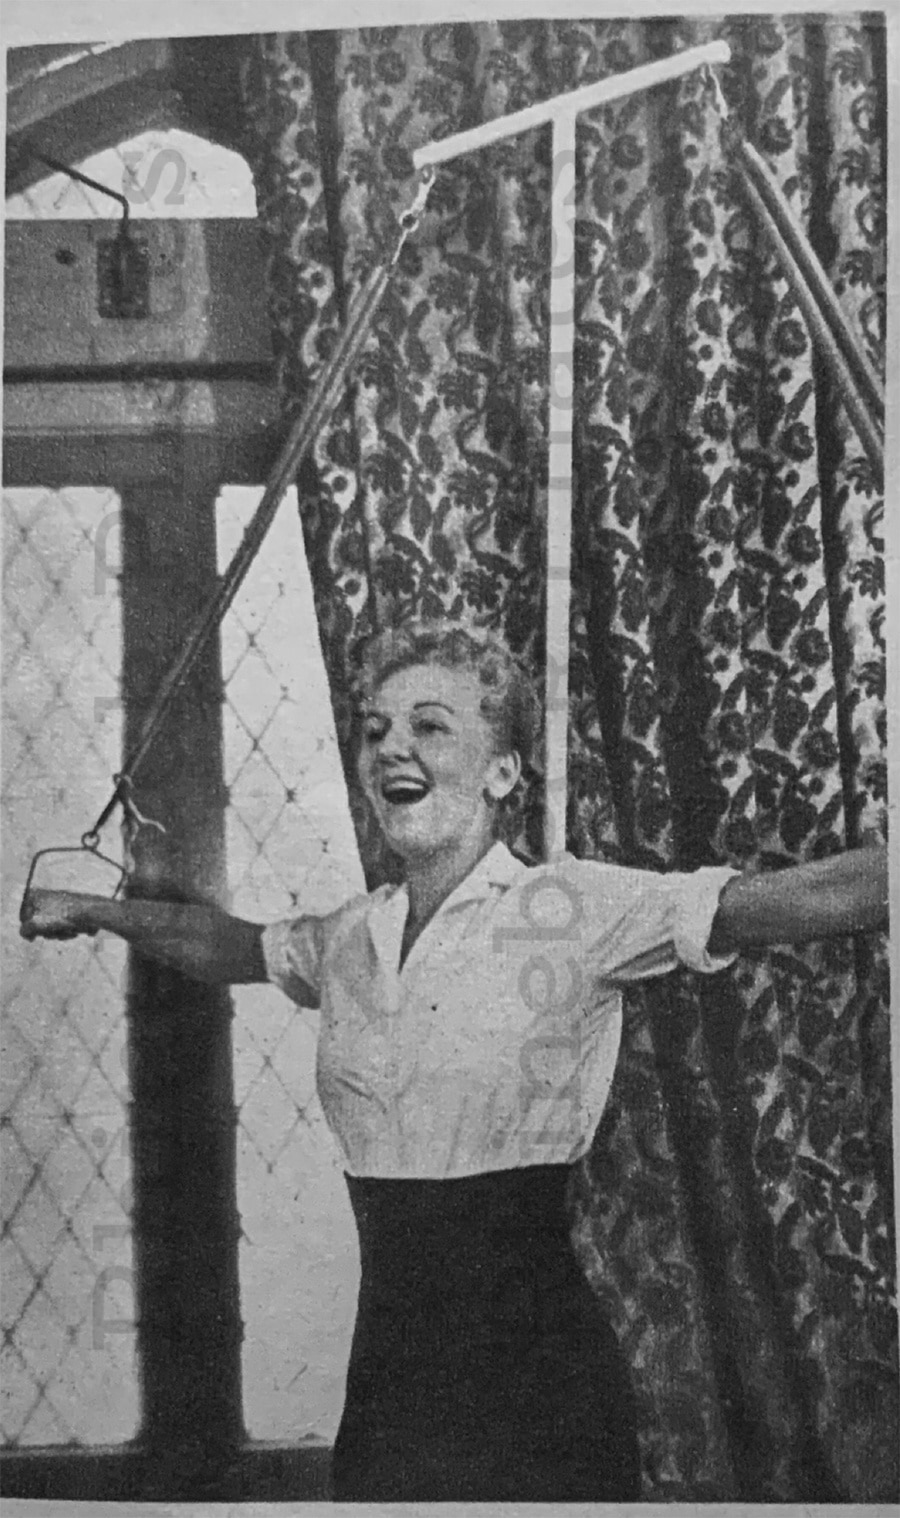 William Herman and Mary Martin with punching bag